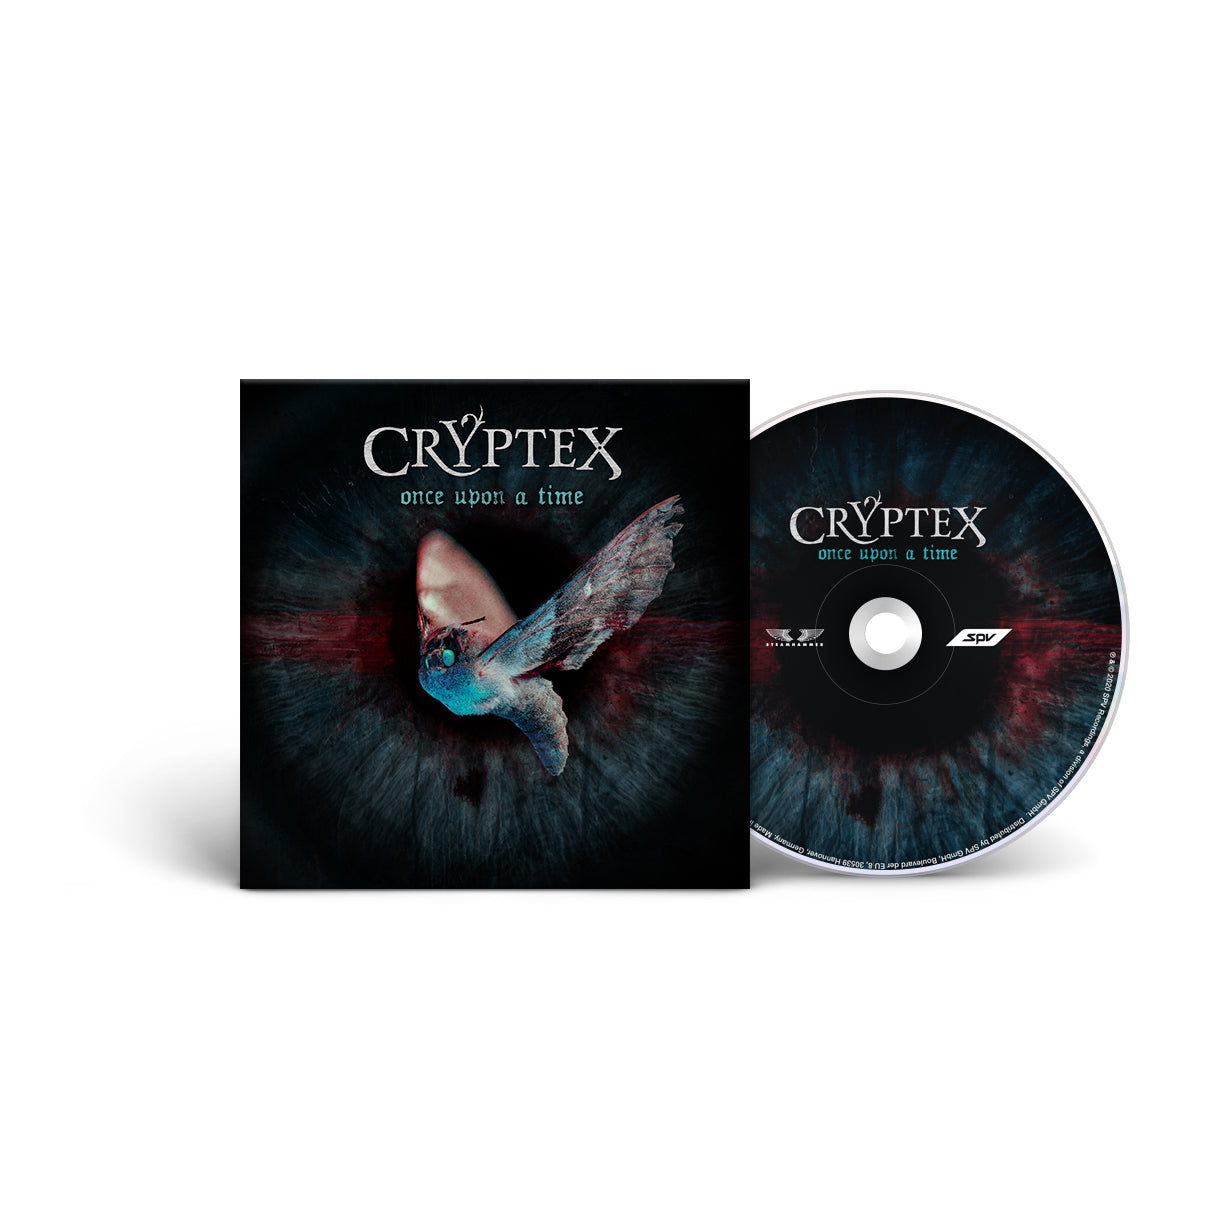 Cryptex "Once Upon A Time" CD